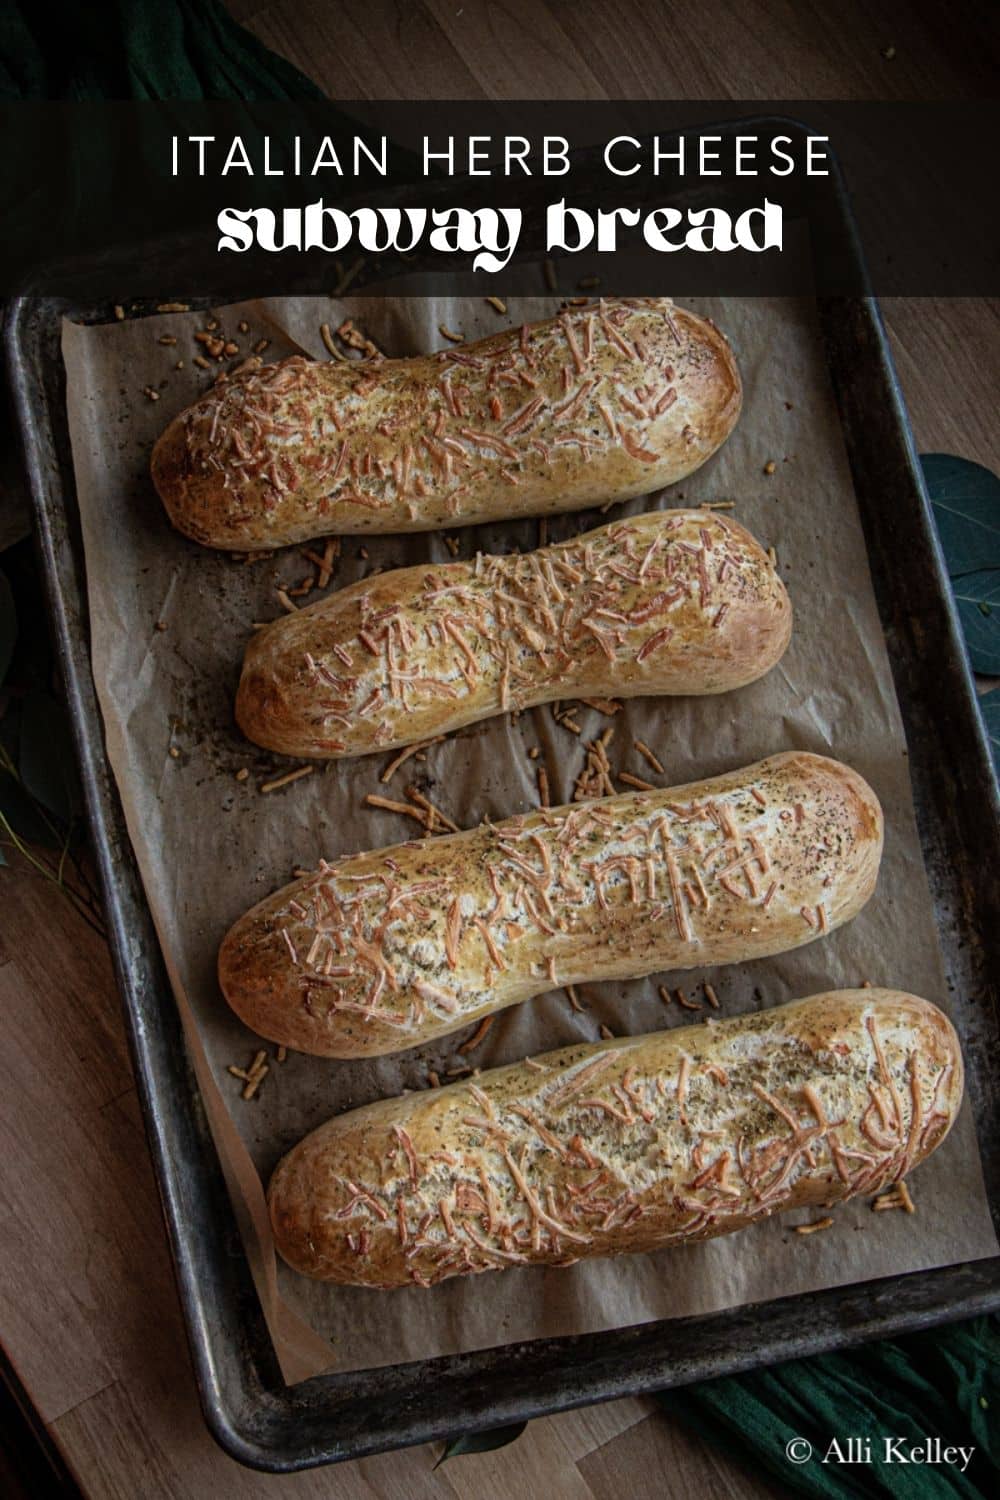 With its flavorful combination of herbs and cheese, my Italian Subway bread recipe is the perfect base for any sandwich! With this recipe, you can have the same deliciousness of Subway-style sandwiches without ever having to leave the house. With its soft texture and irresistible aroma, my Subway Italian herb and cheese bread will make your lunchtime a real treat!